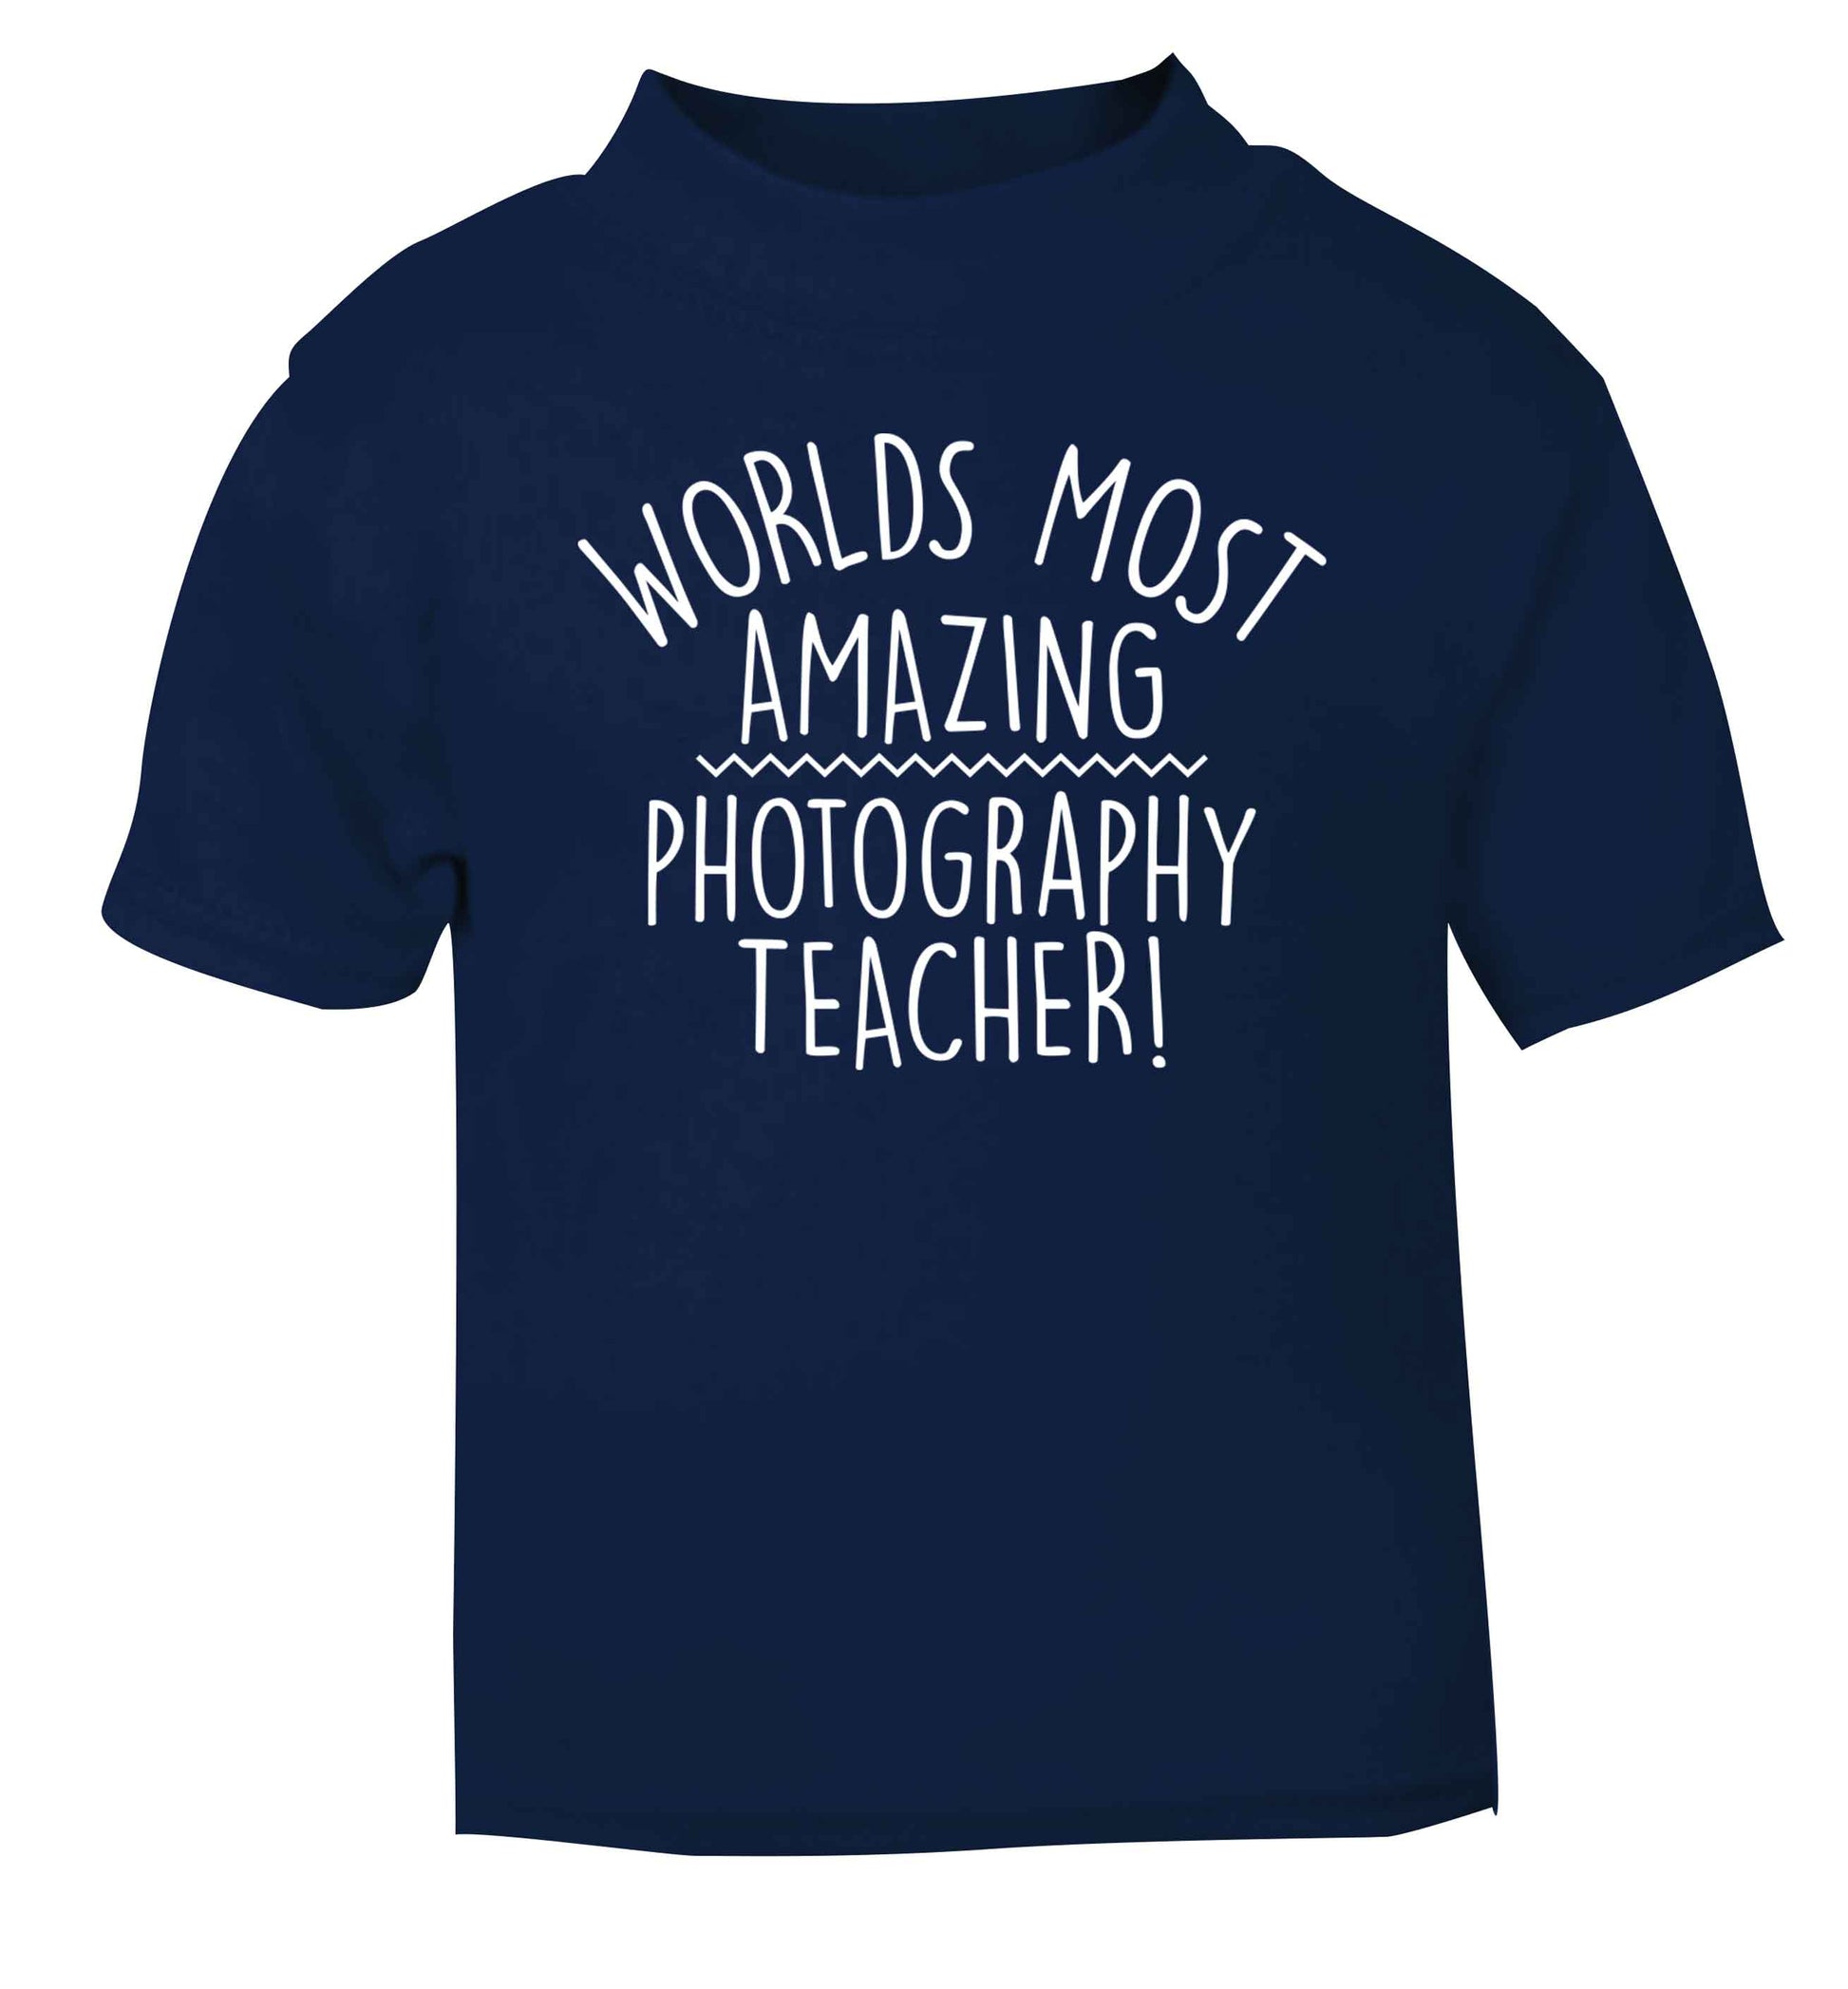 Worlds most amazing photography teacher navy baby toddler Tshirt 2 Years